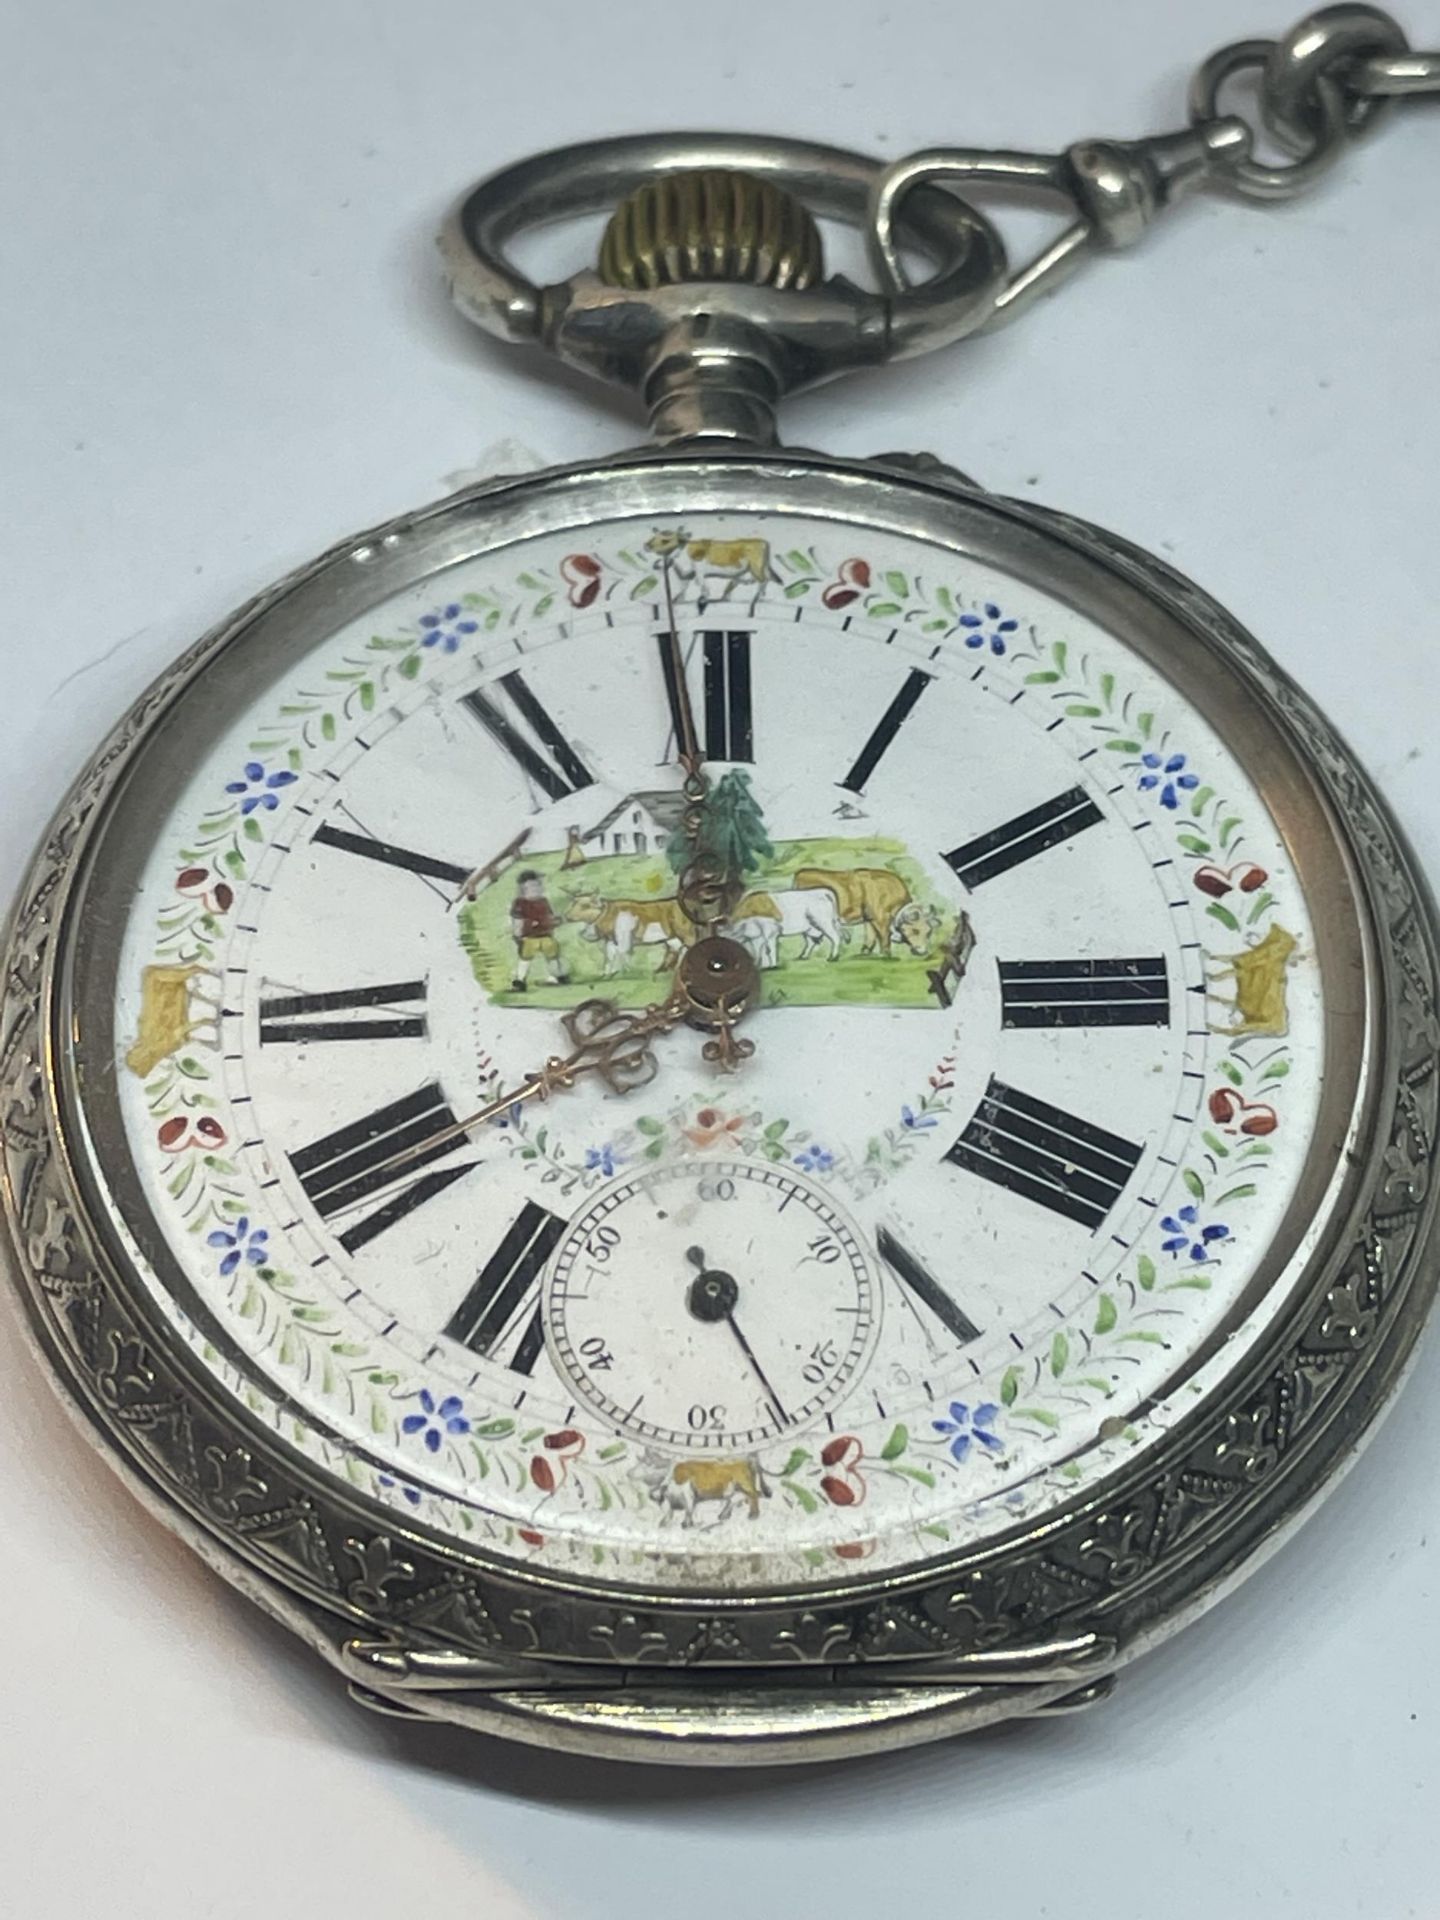 AN ANTIQUE .800 SILVER GOLIATH POCKET WATCH WITH A .830 SILVER CHAIN, SEEN WORKING BUT NO WARRANTIES - Image 2 of 6